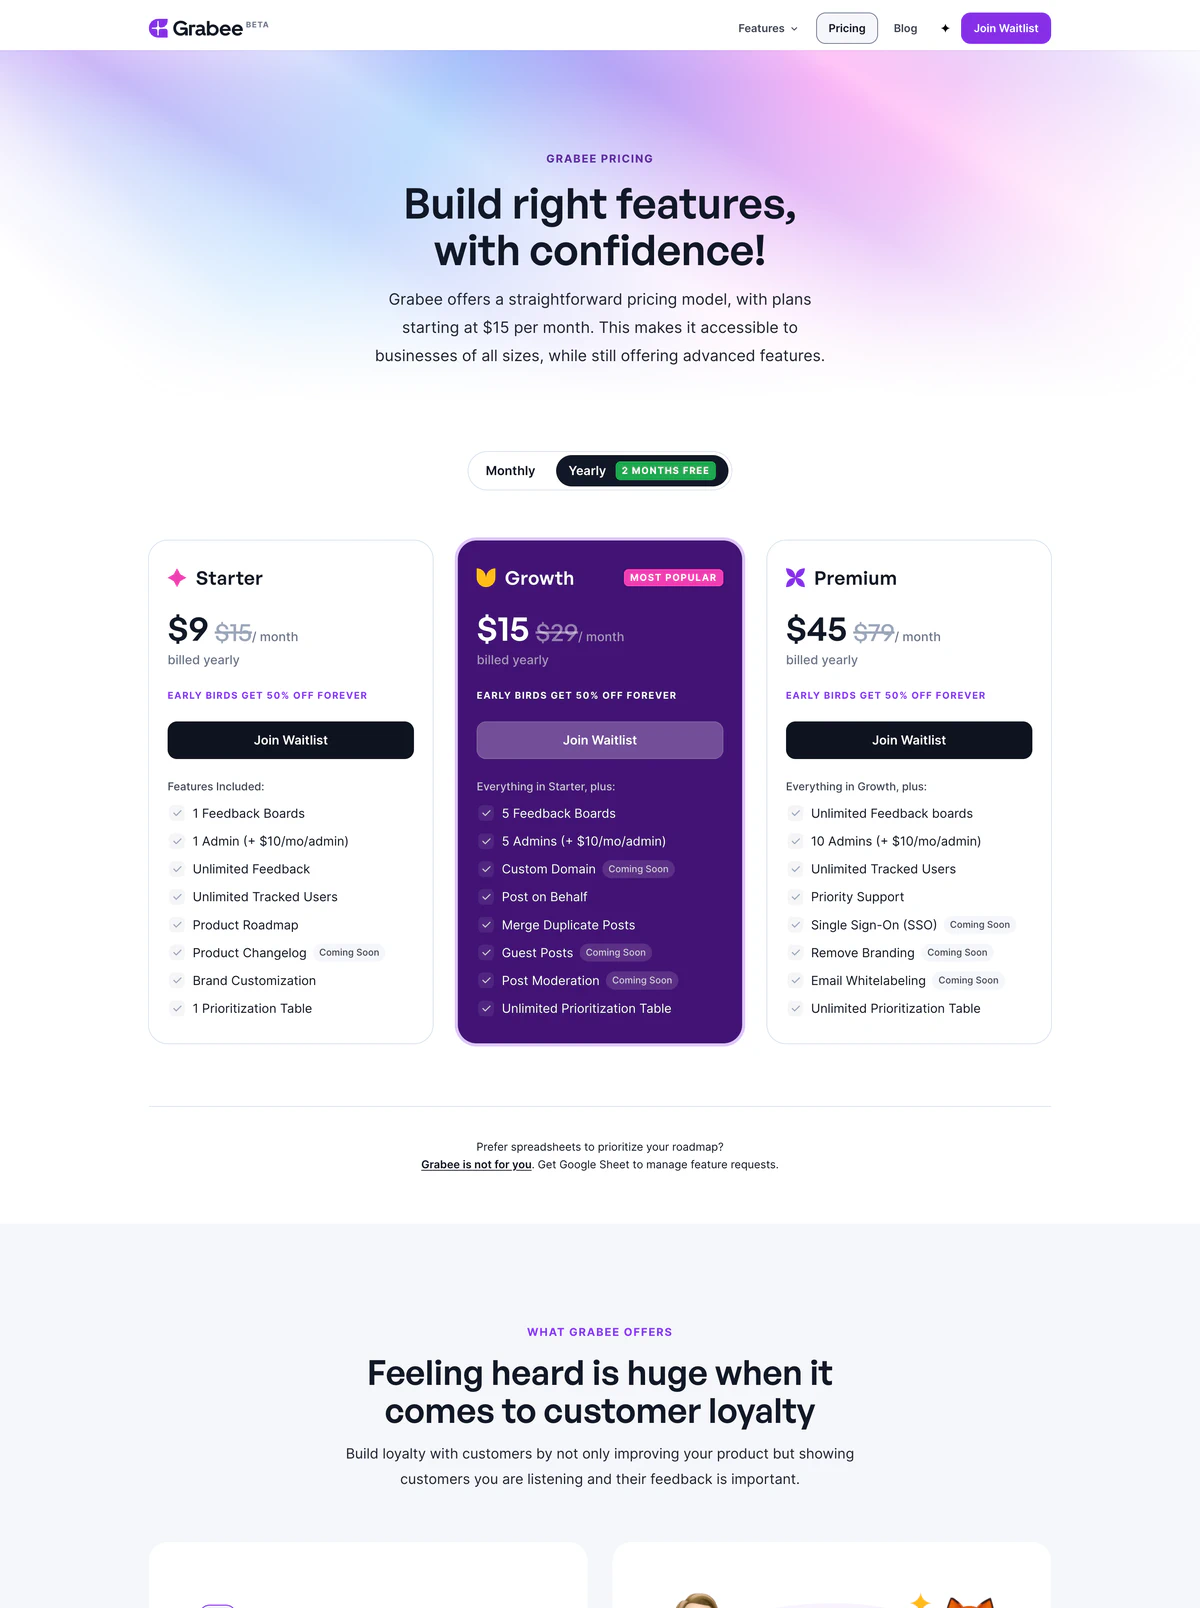 Pricing Page Example Grabee